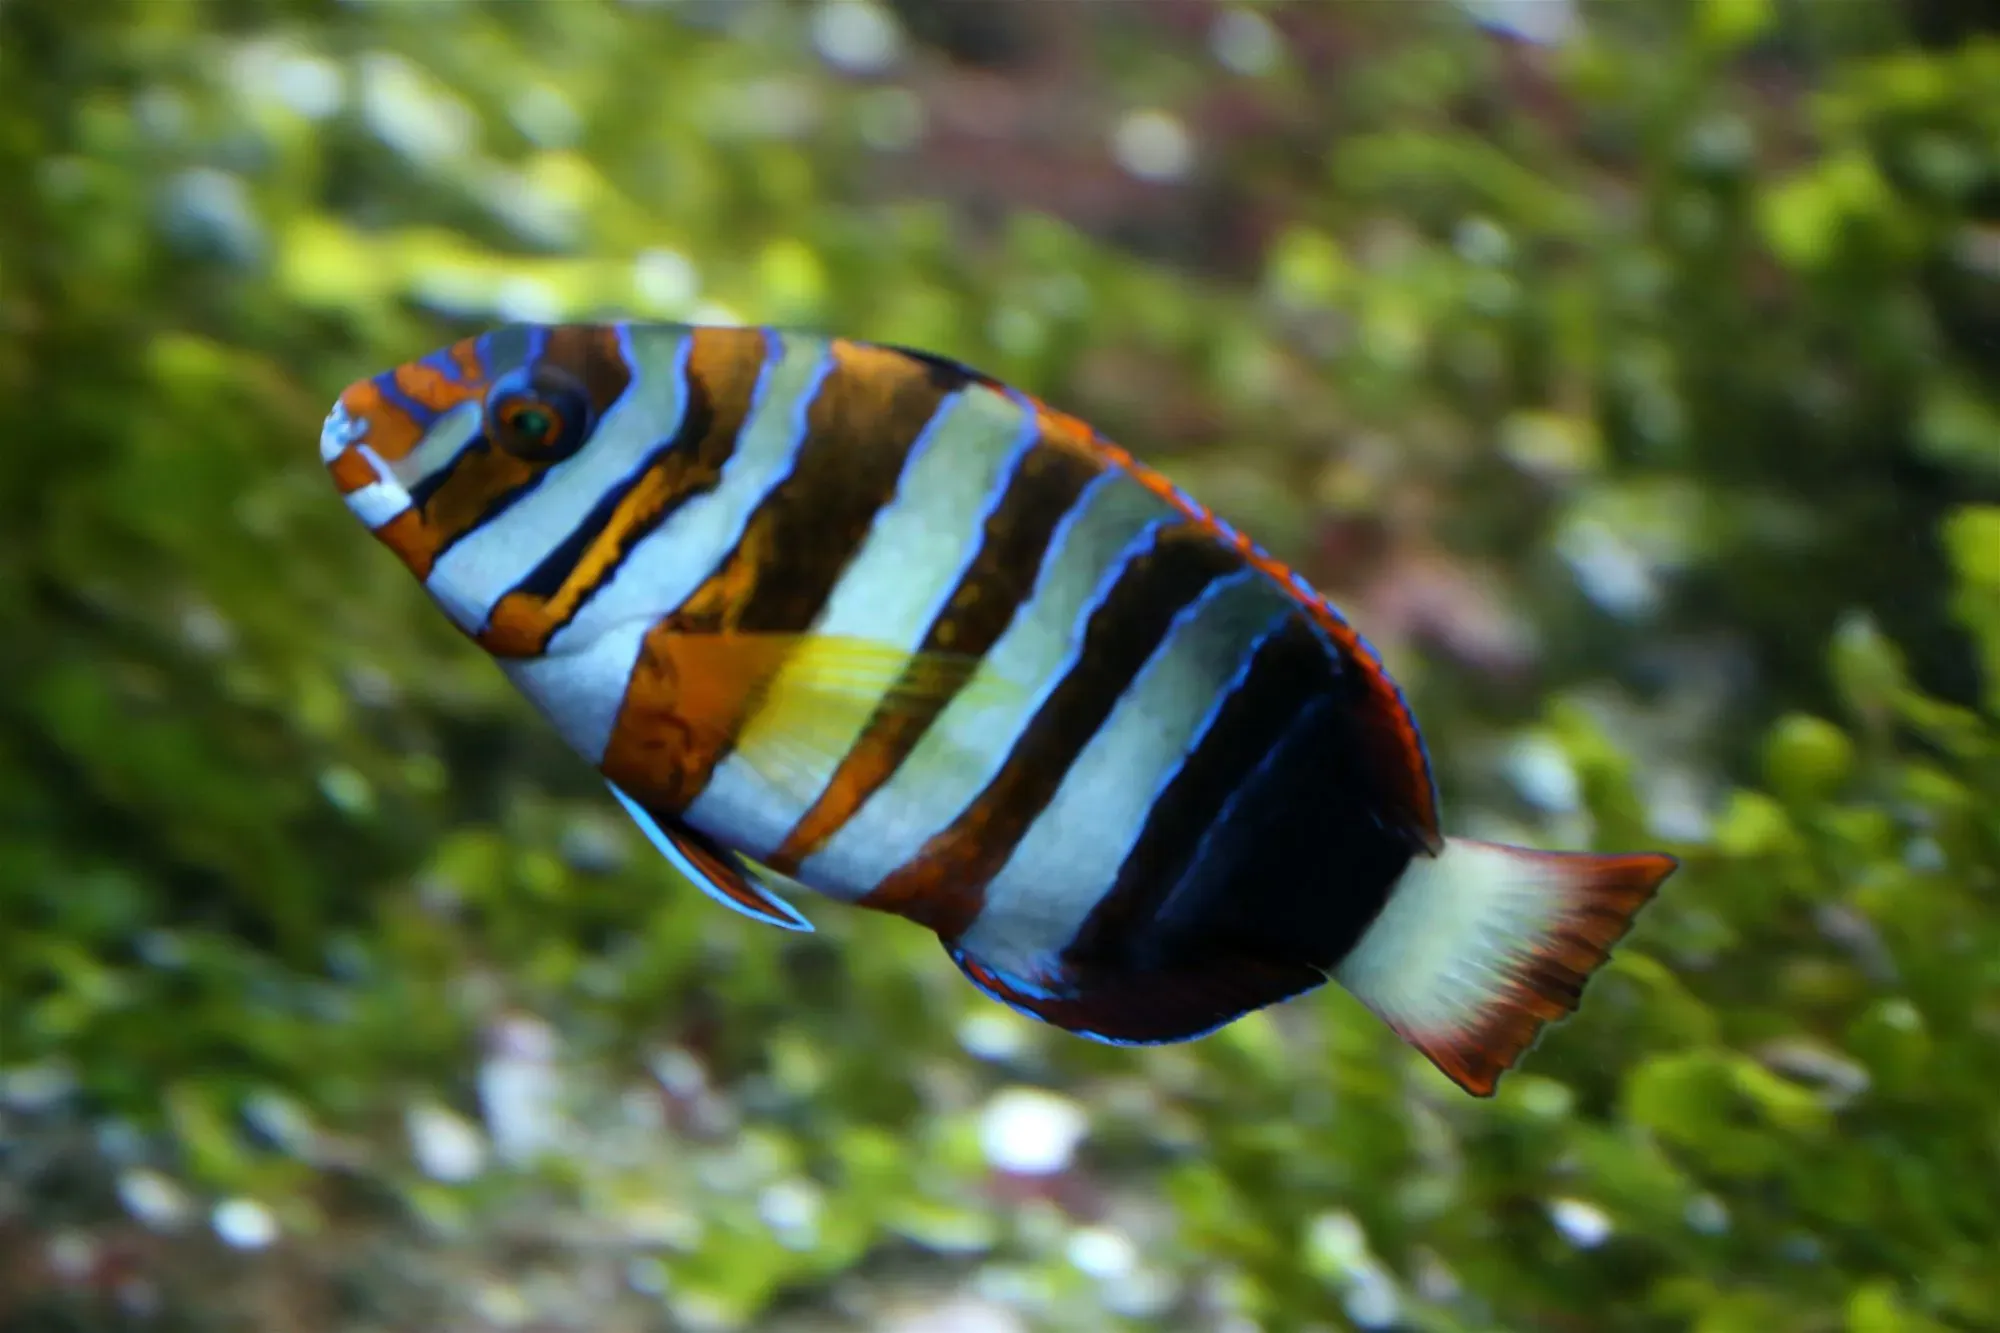 The harlequin tuskfish has alternating orange and white bands with blue borders on its body.